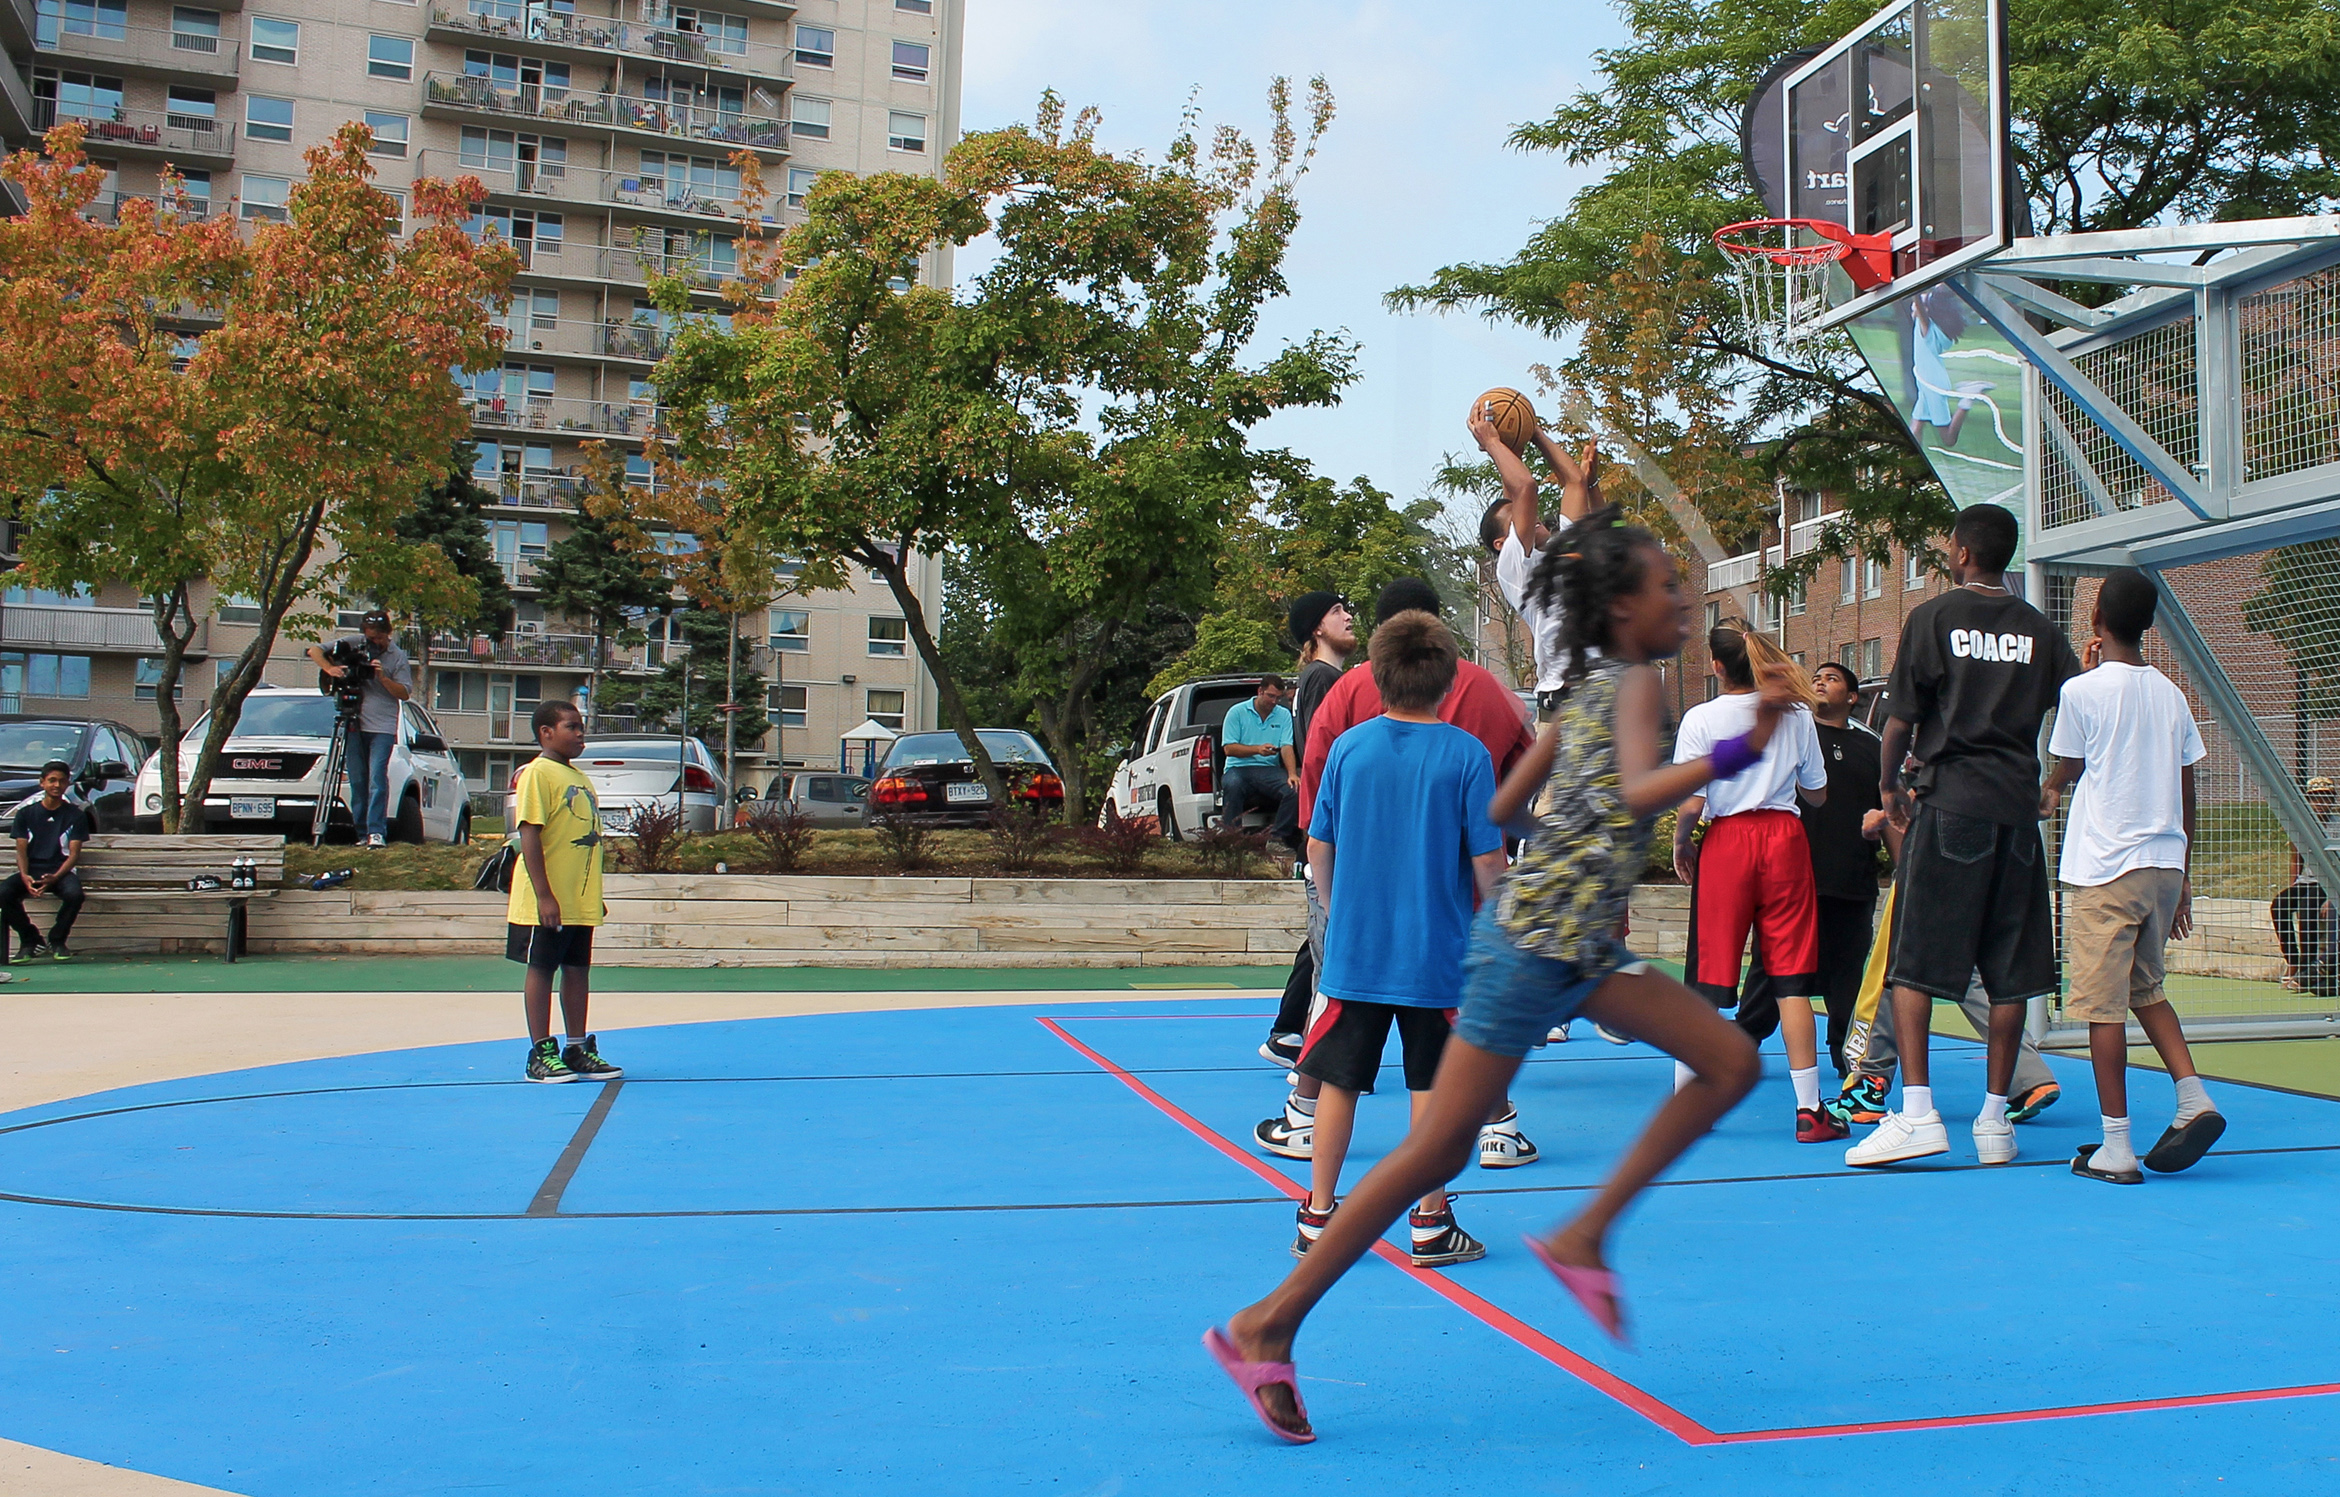 Court side photograph of children gathered under the net, playing a game of basketball on the Storefront Courts.